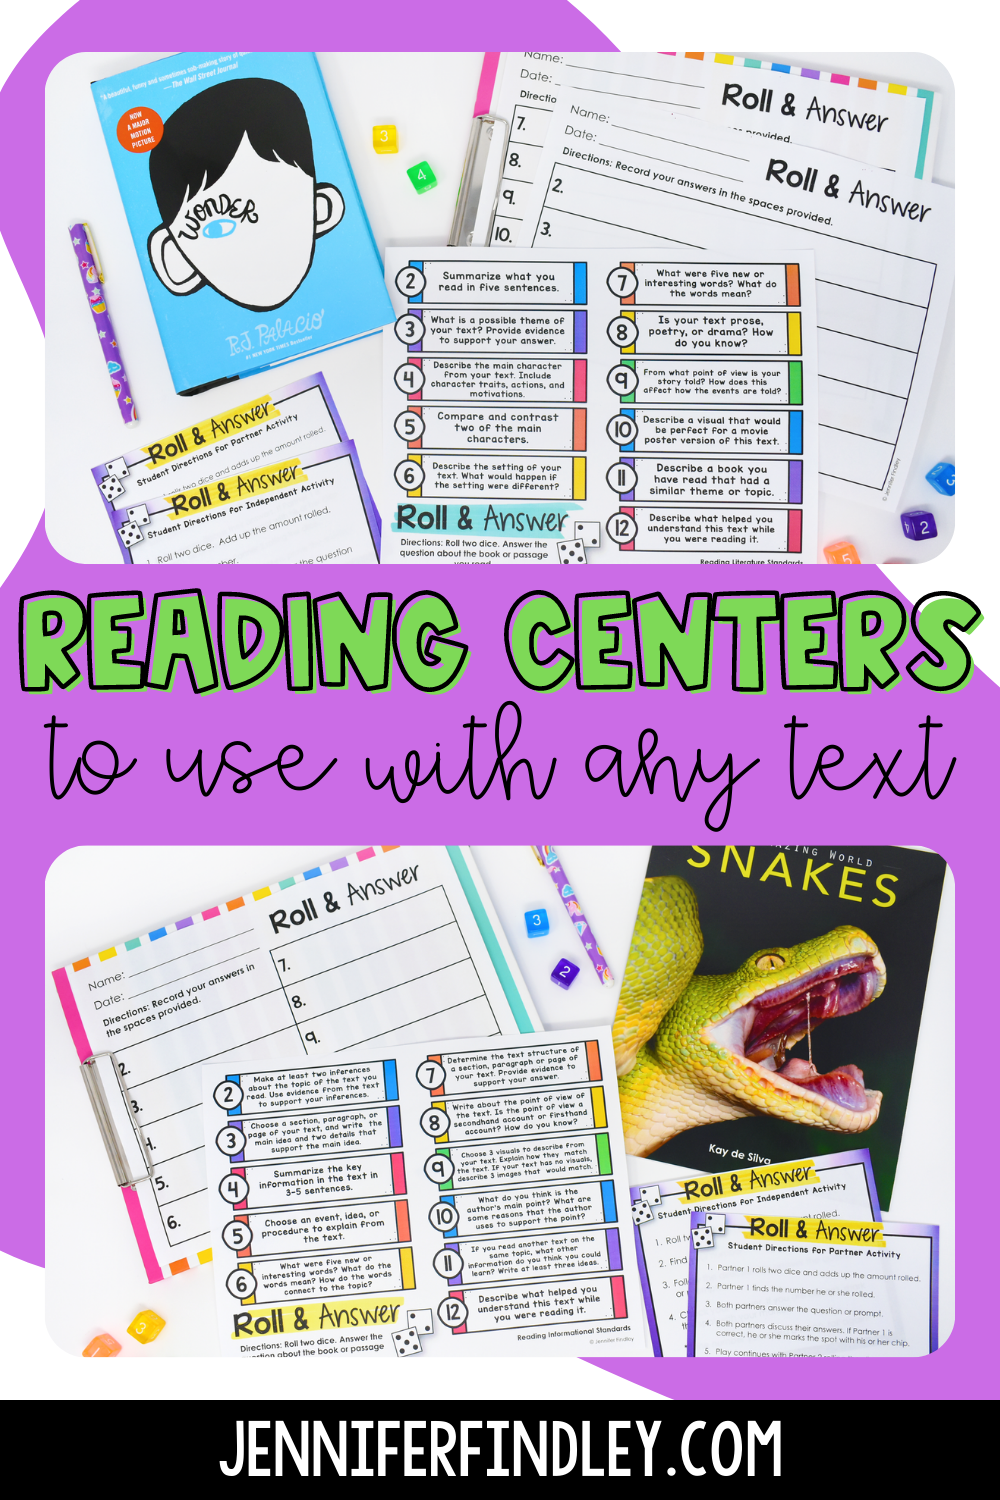 FREE 4th and 5th Grade Reading Centers to use with ANY text! Read more and grab the free reading centers to use with any book or passage that the students are reading. These free reading centers are perfect for literacy centers, reading stations, reader’s response, or during guided reading rotations.